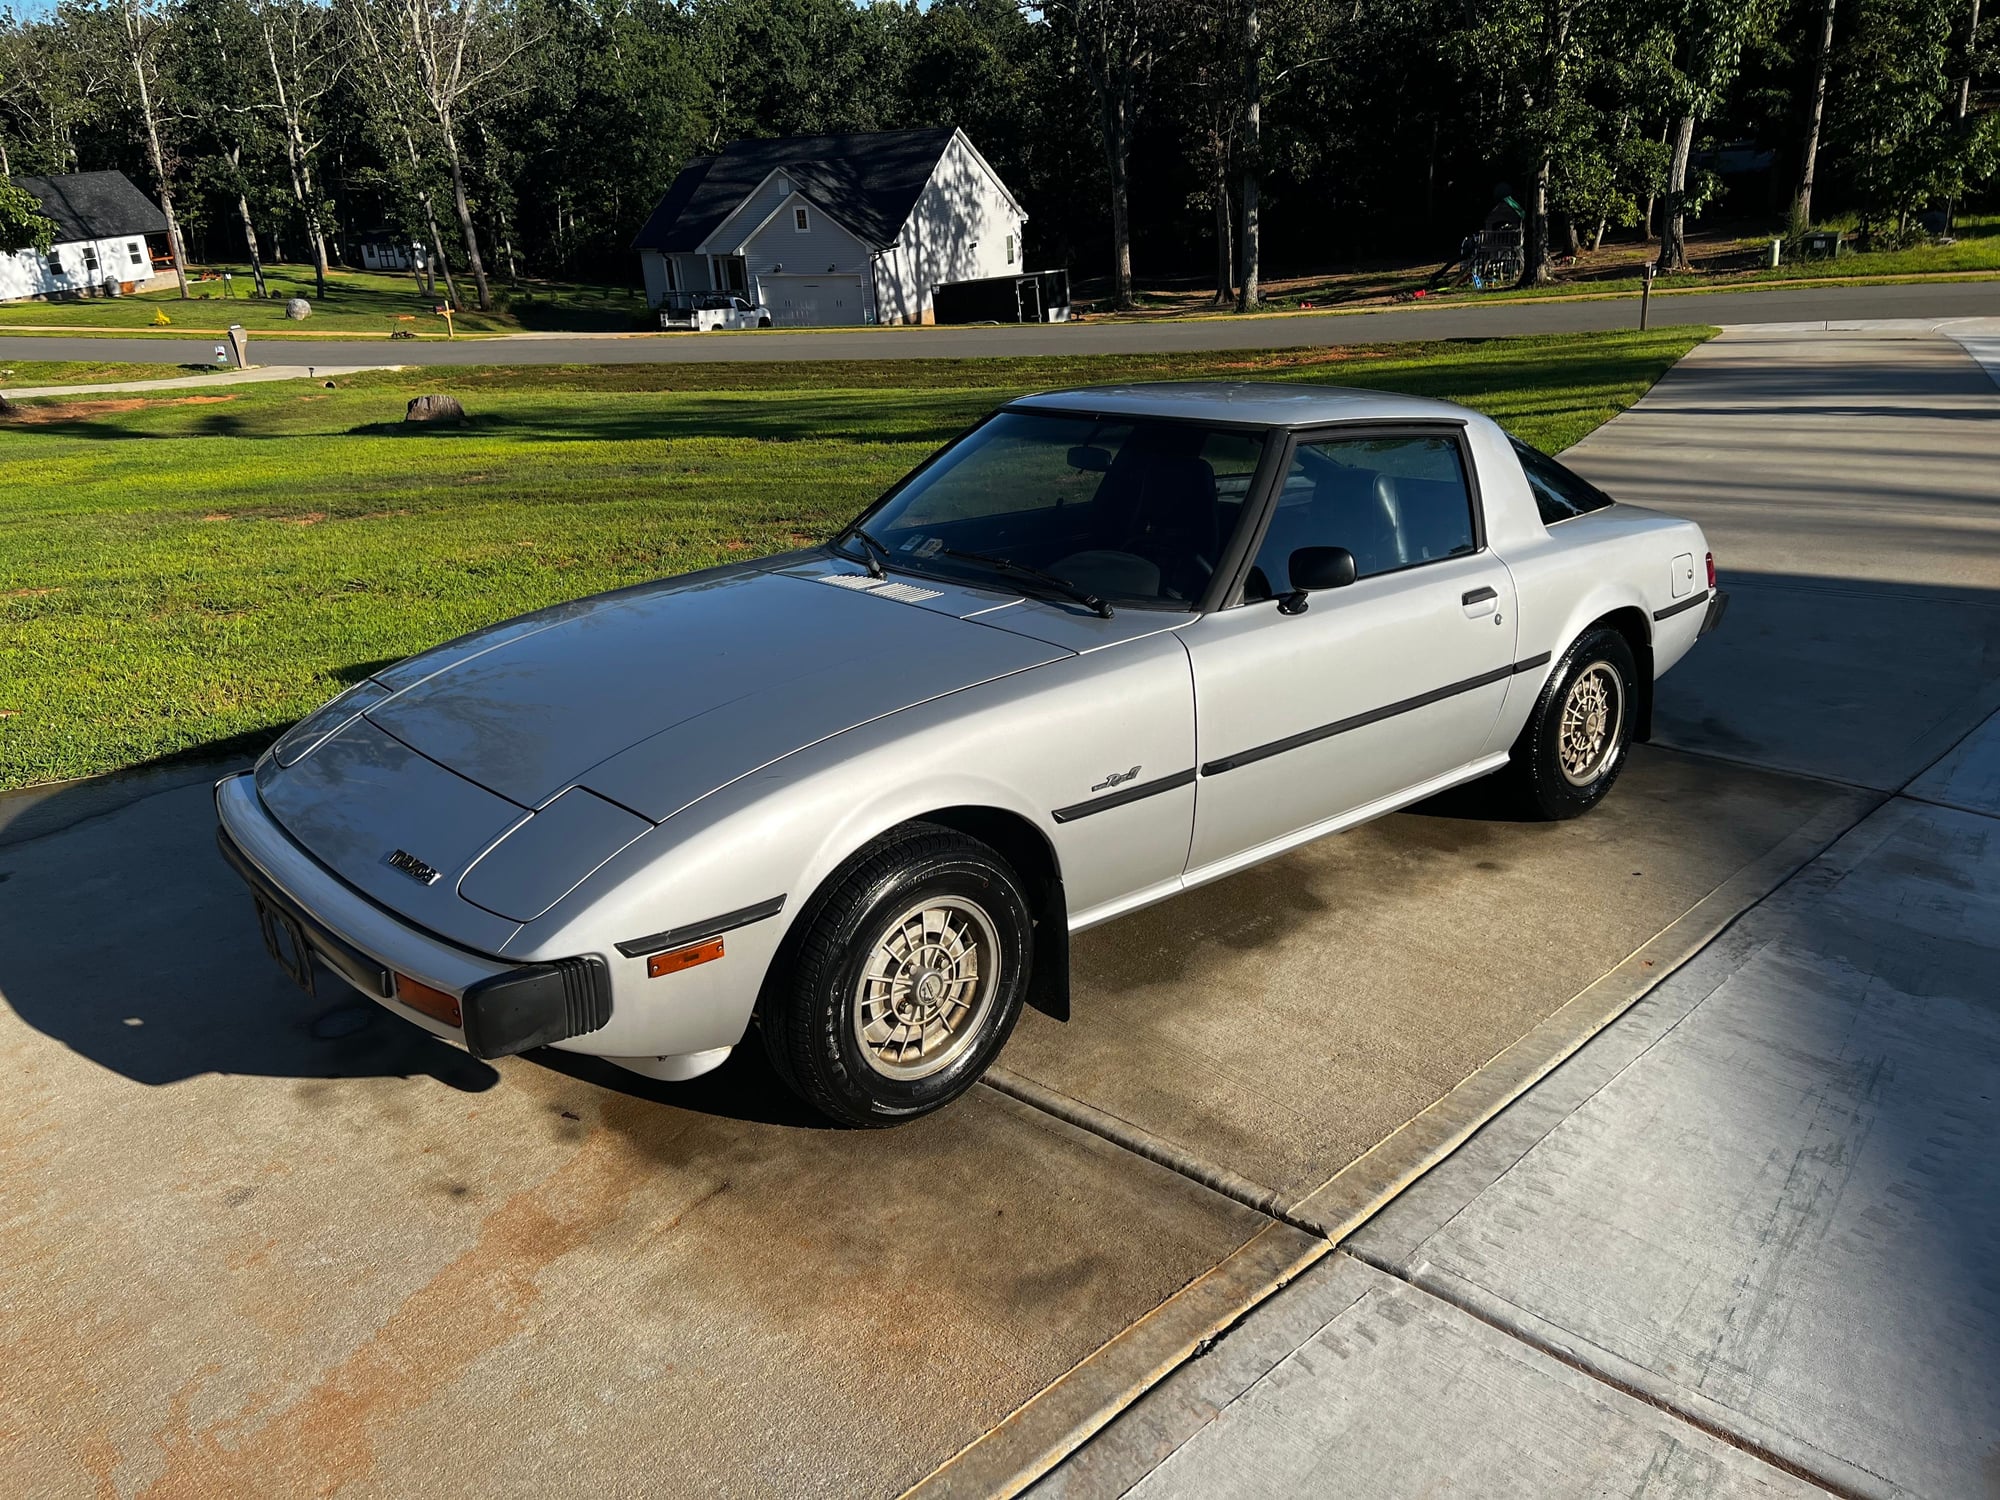 1979 Mazda RX-7 - 1979 rx-7 - Used - VIN SA22C501478 - 133,686 Miles - 2 cyl - 2WD - Manual - Coupe - Silver - Maiden, NC 28650, United States